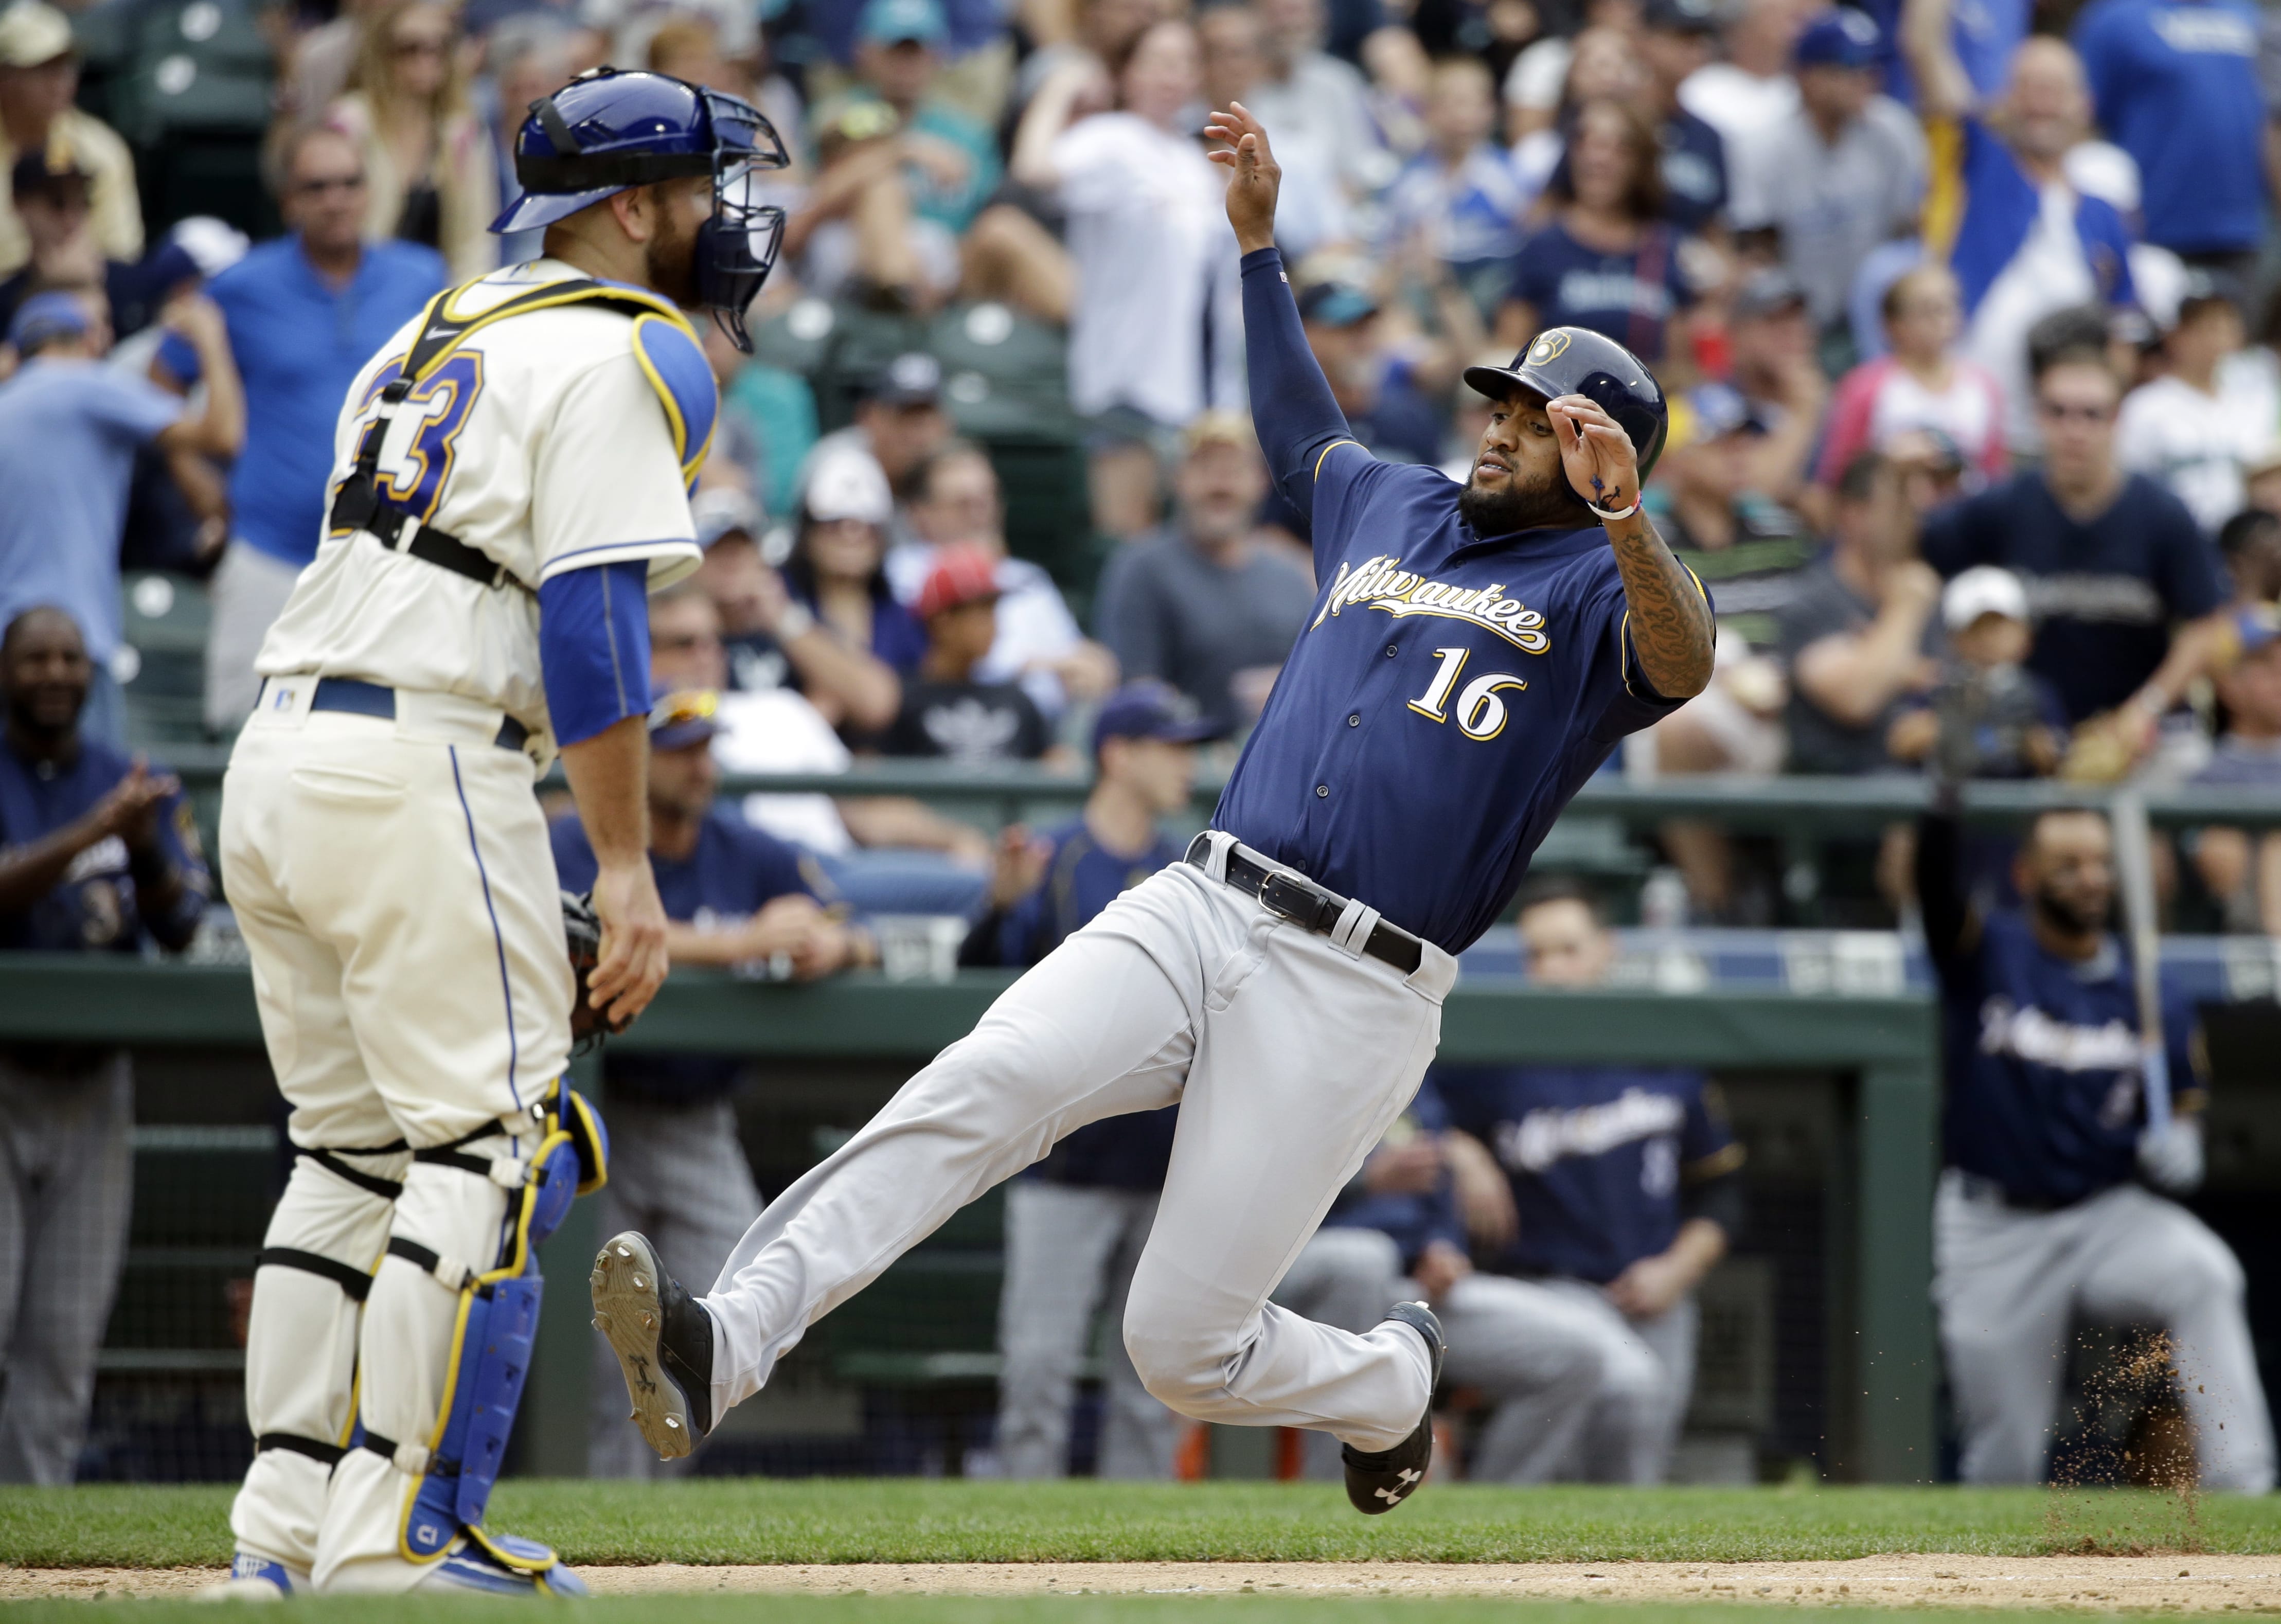 Seattle Mariners catcher Chris Iannetta waits for the throw as Milwaukee Brewers' Domingo Santana slides safely into home to score in the ninth inning of a baseball game, Sunday, Aug. 21, 2016, in Seattle.